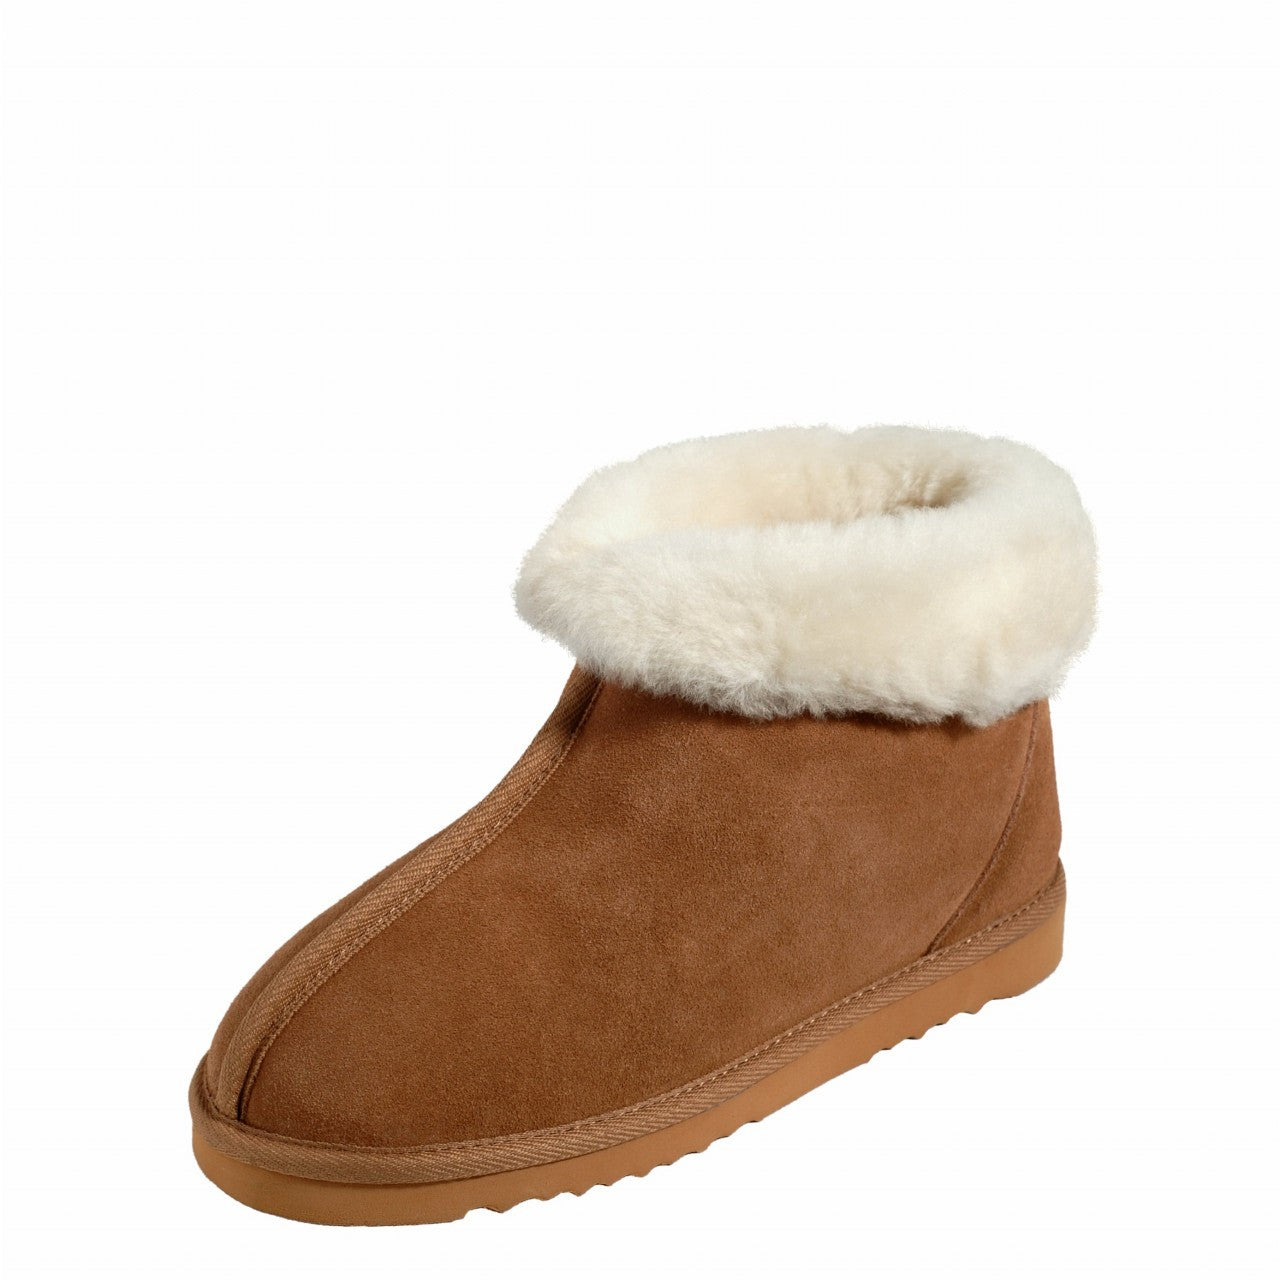 Slippers & Ugg Boots